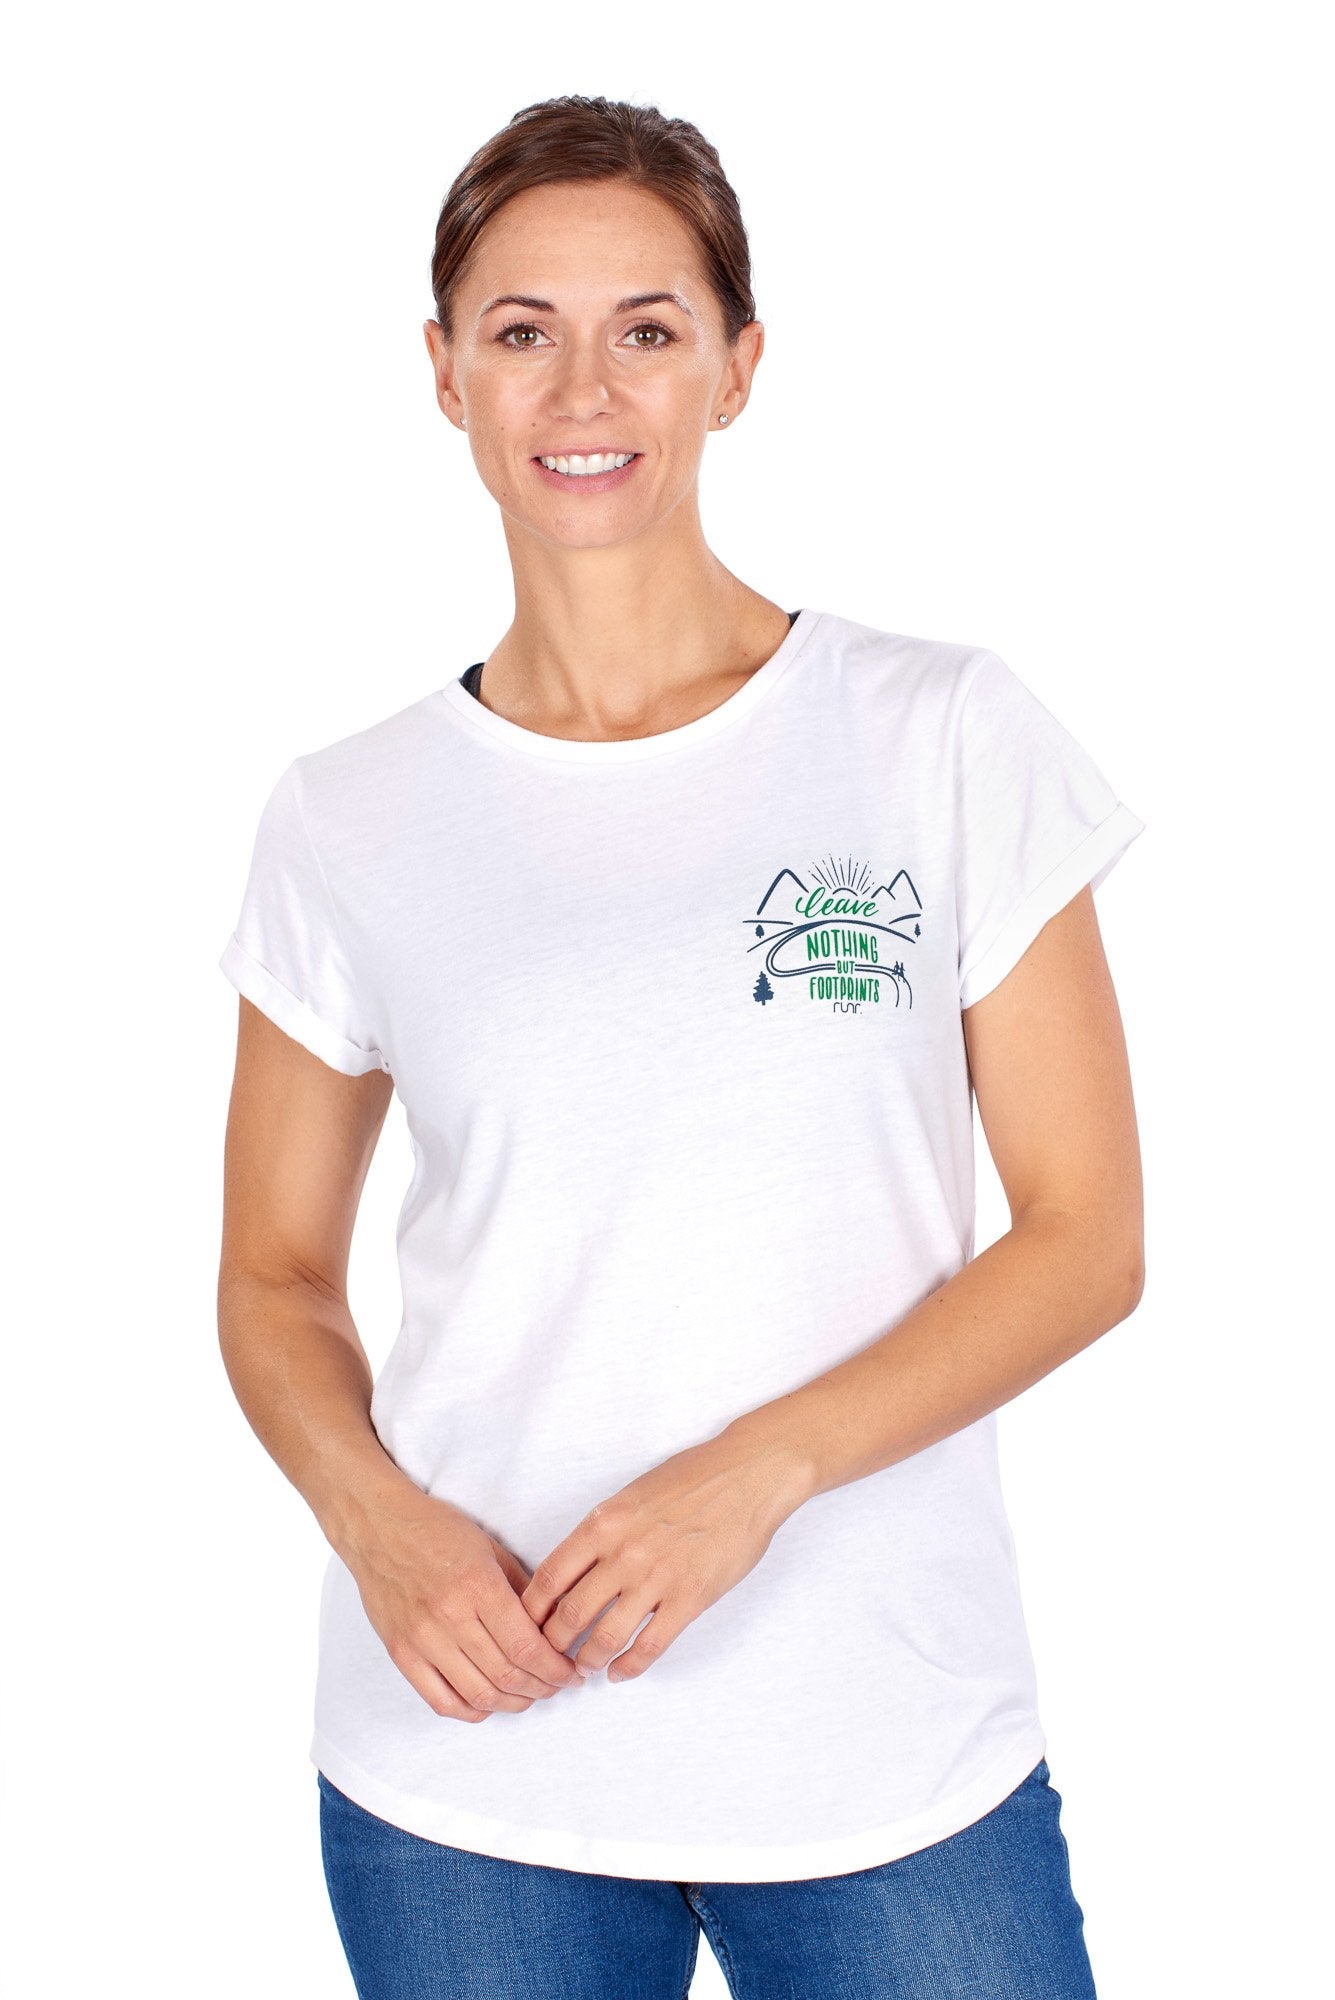 Women's 'Leave Nothing But Footprints' Runr T-Shirts - white